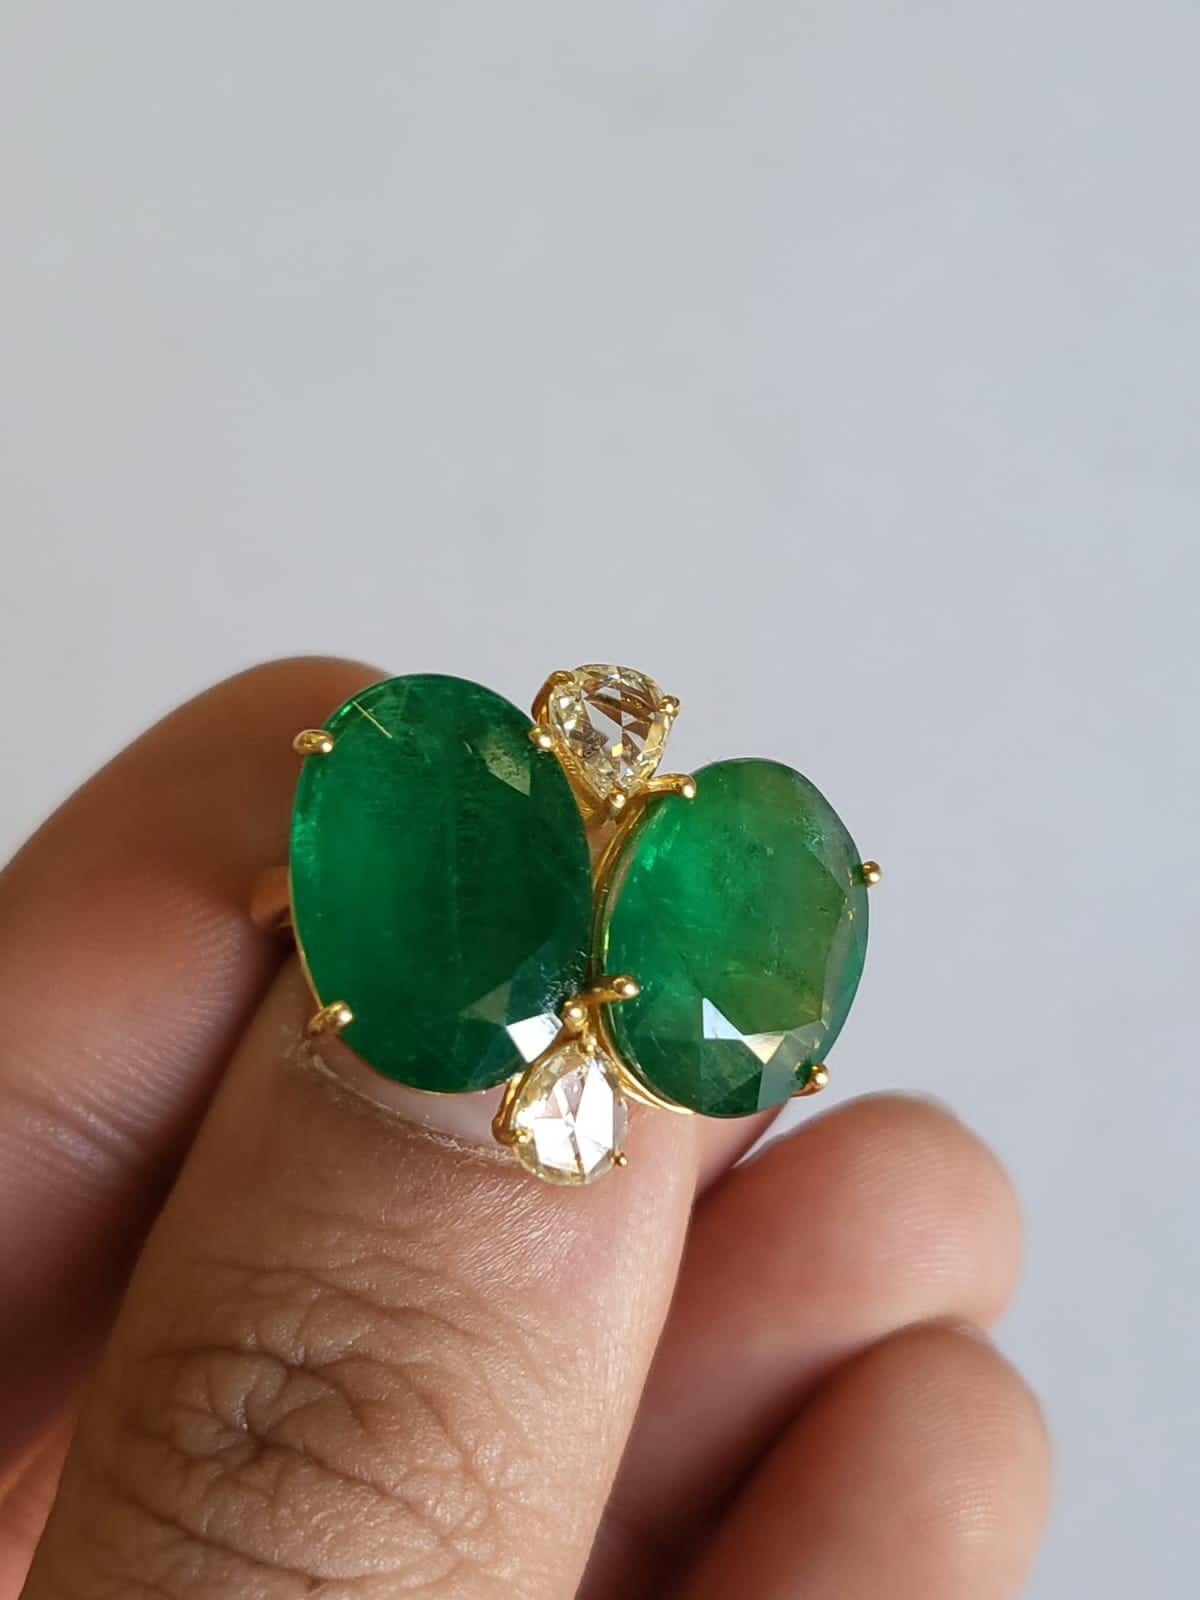 A very gorgeous and one of a kind, Emerald Cocktail Ring set in 18K Matte Yellow Gold & Diamonds. The weight of the Emeralds is 12.04 carats. The Emeralds are completely natural, without any treatment and is of Zambian origin. The weight of the Rose